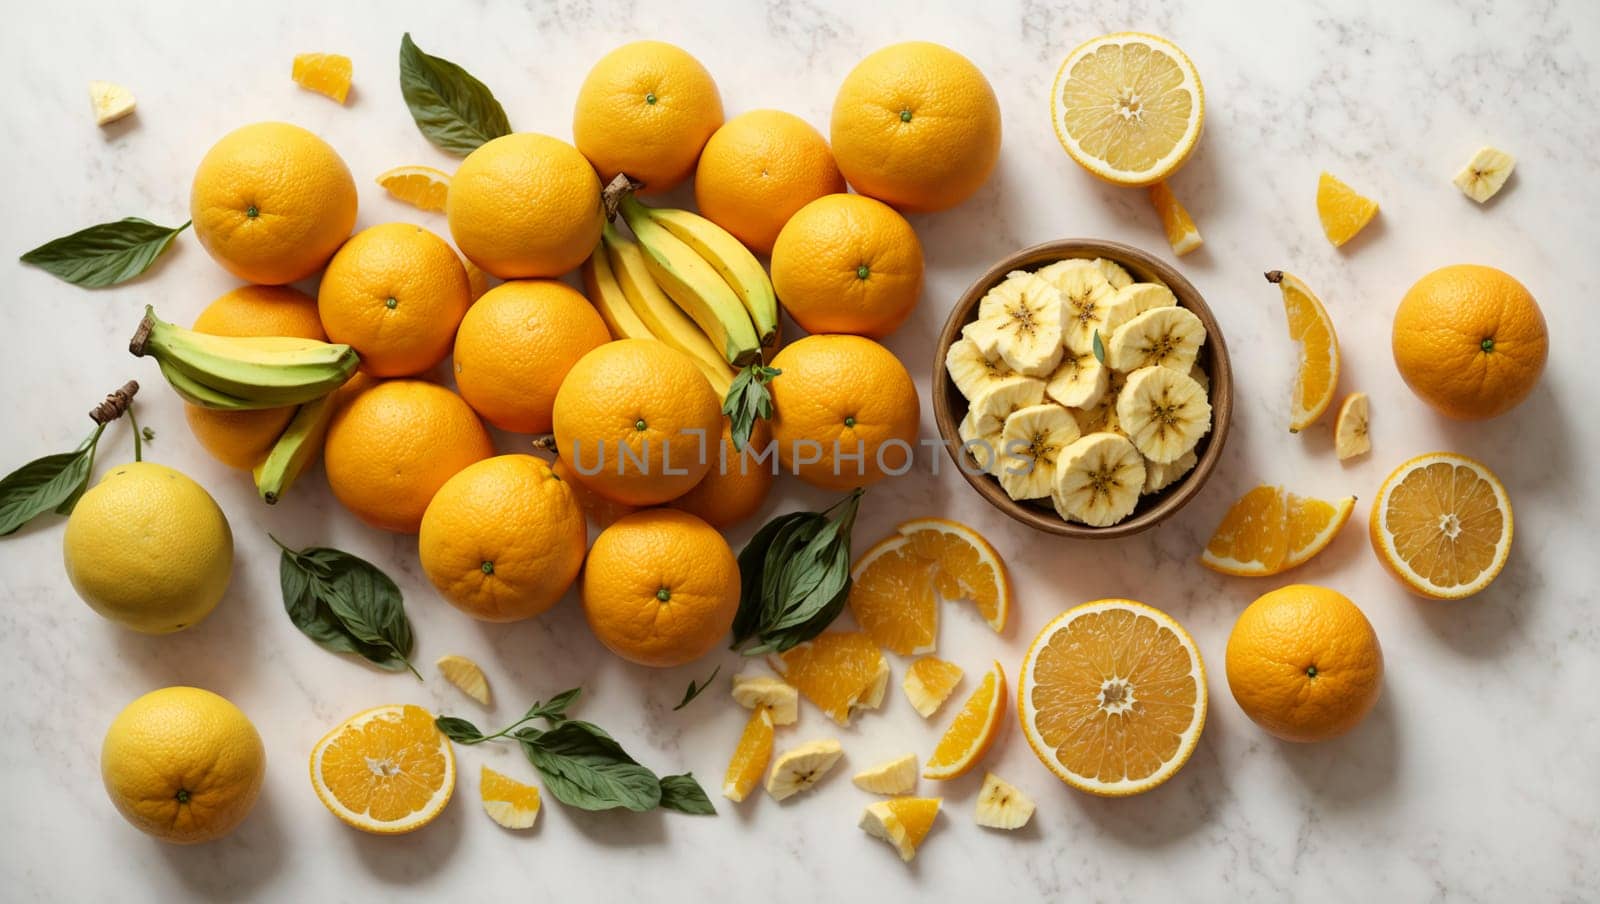 ripe bananas and oranges lie on a bright white background by Севостьянов